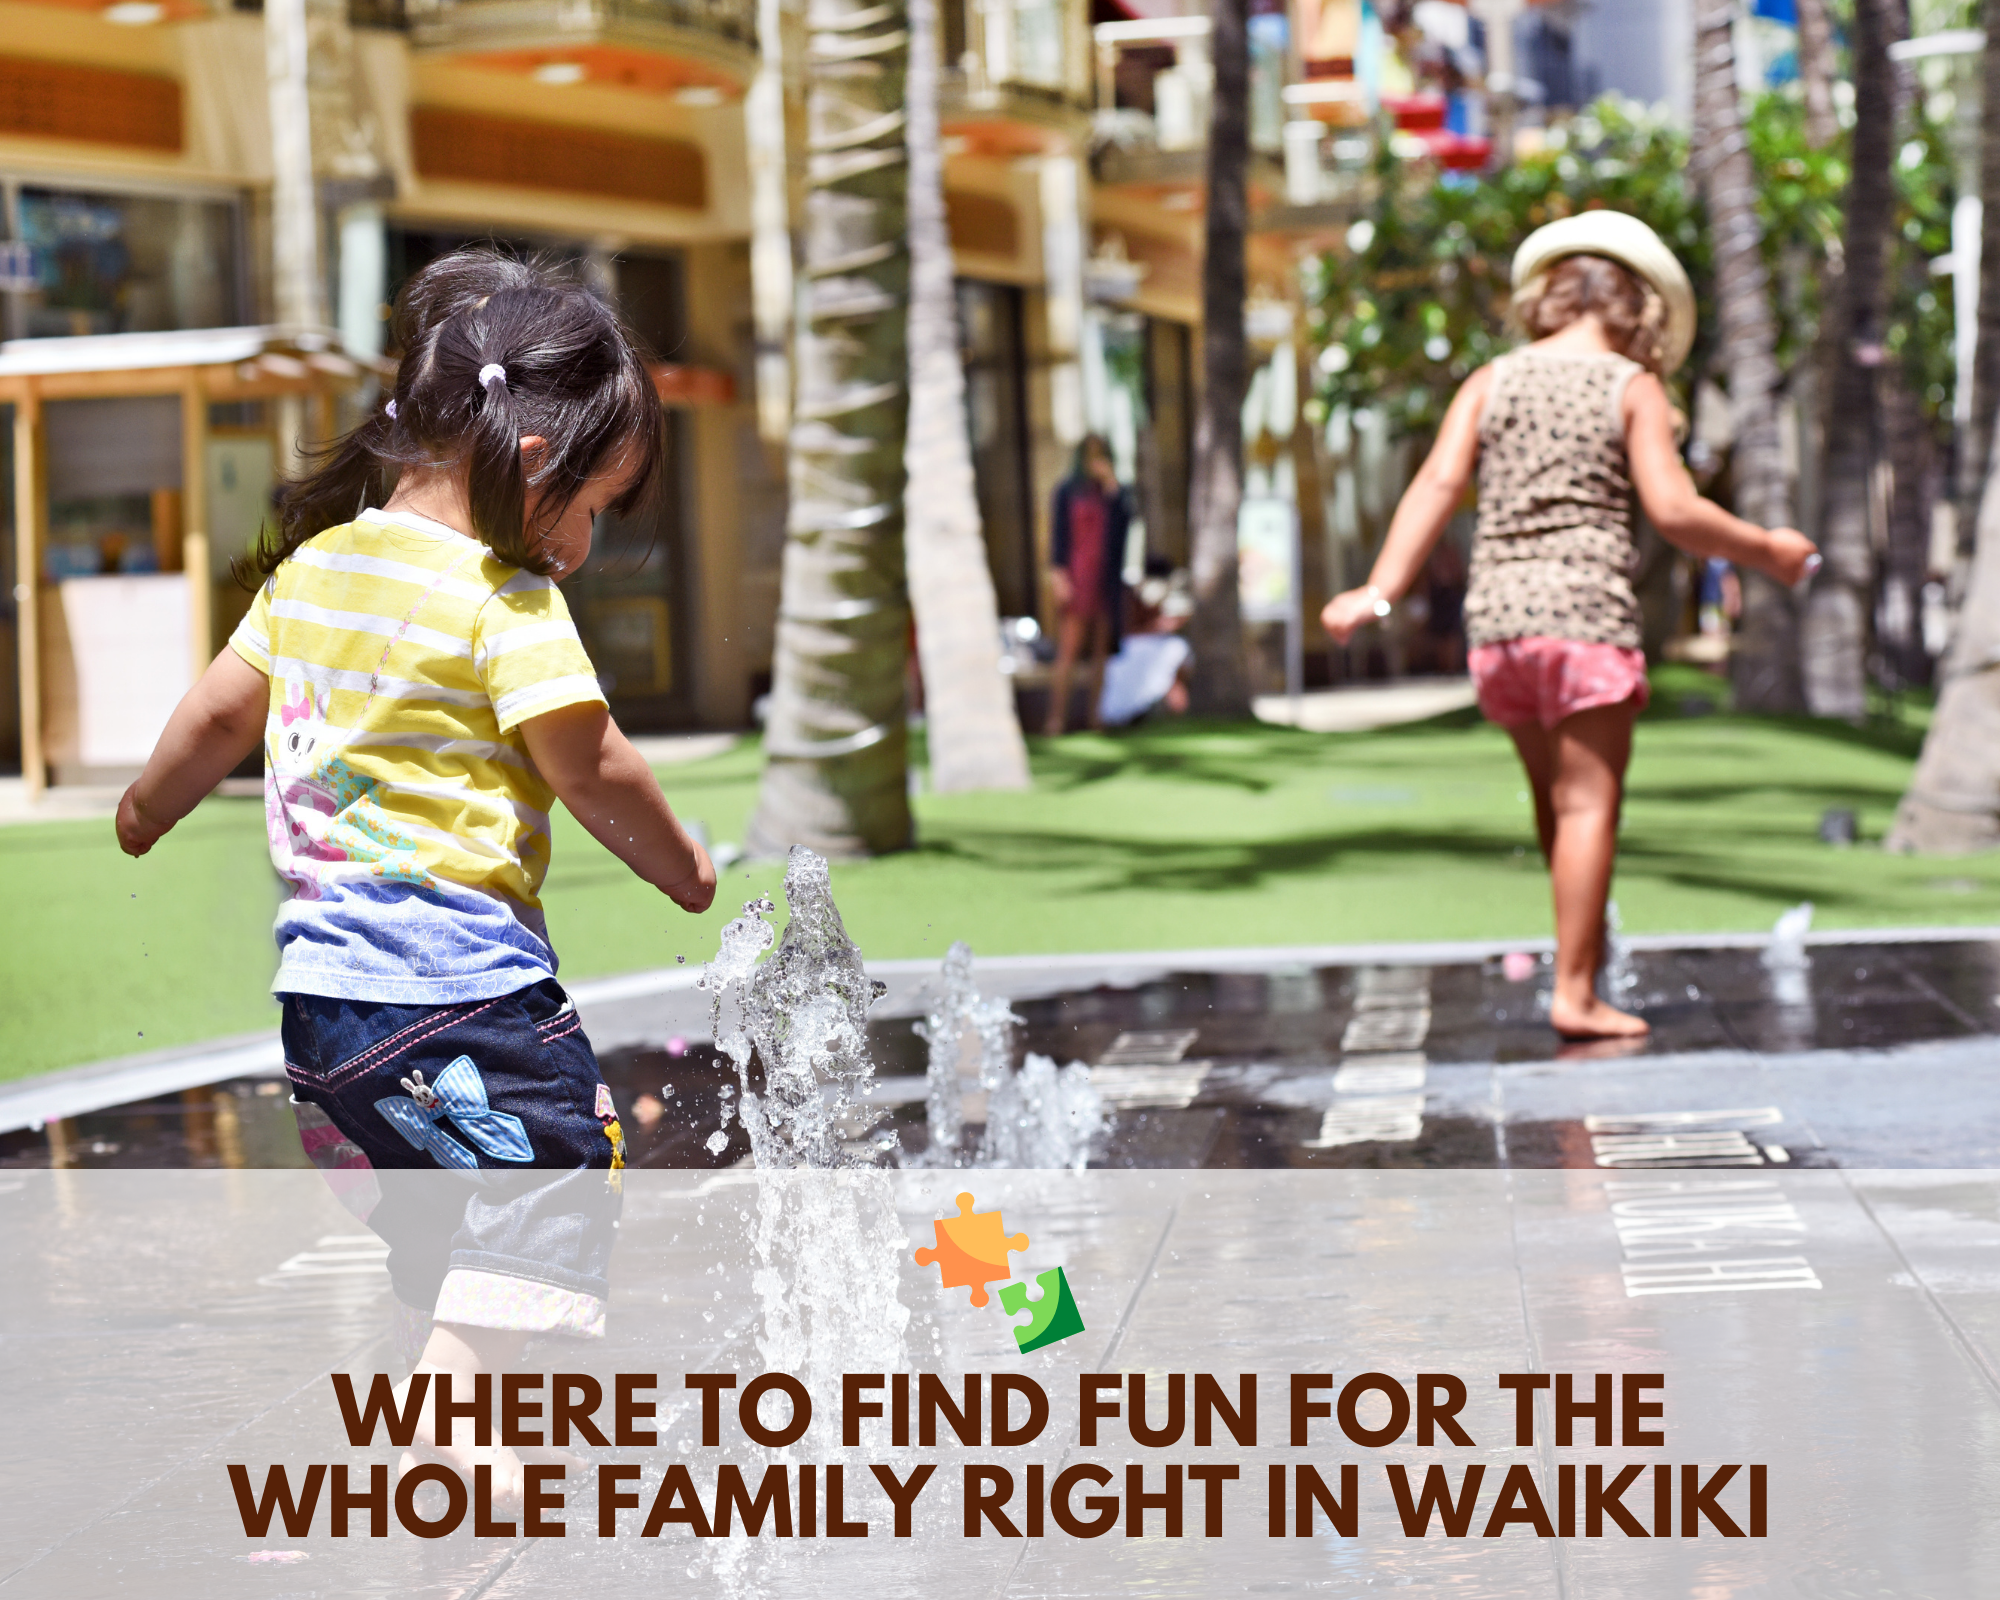 Where to Find Fun for the Whole Family Right in Waikiki